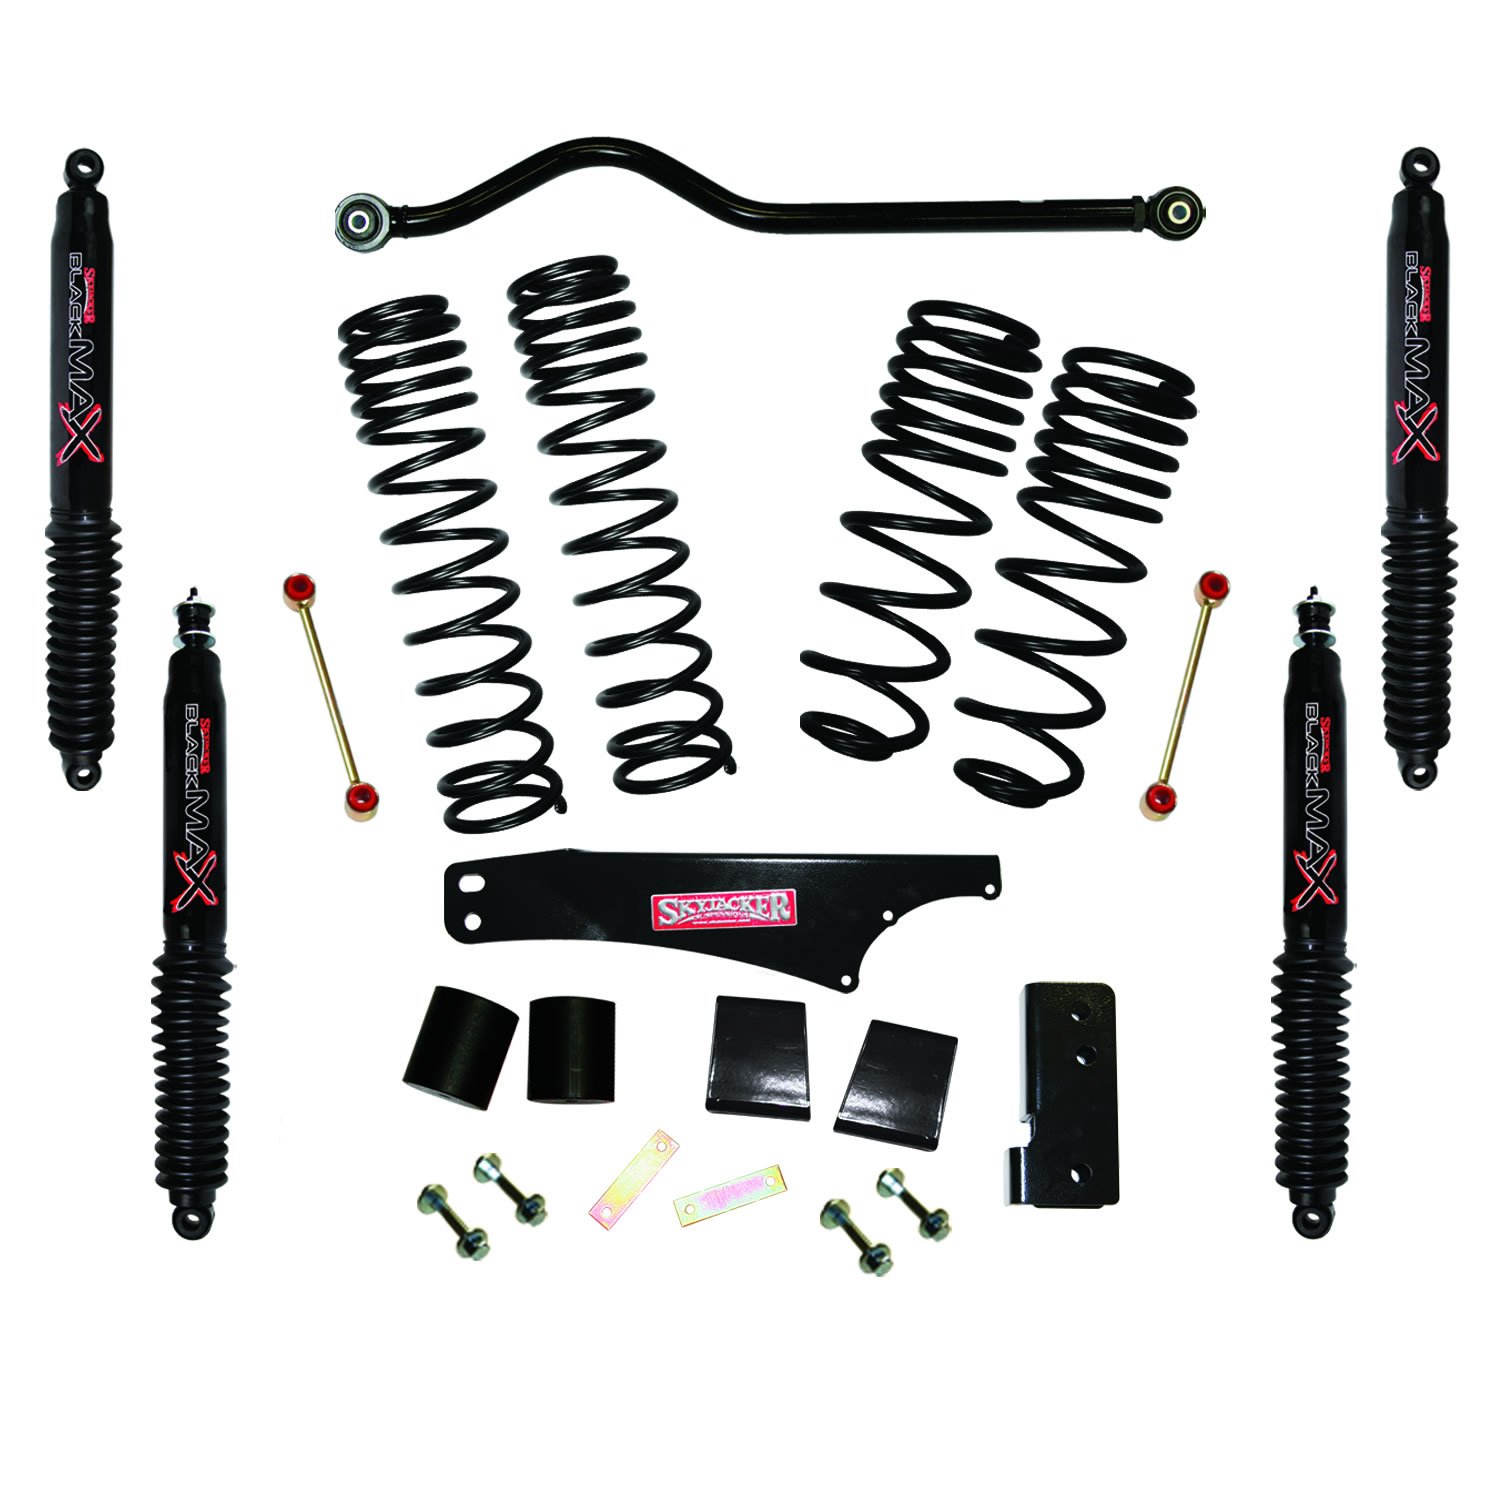 JK40BPBLT Front and Rear Suspension Lift Kit, Lift Amount: 4 in. Front/4 in. Rear